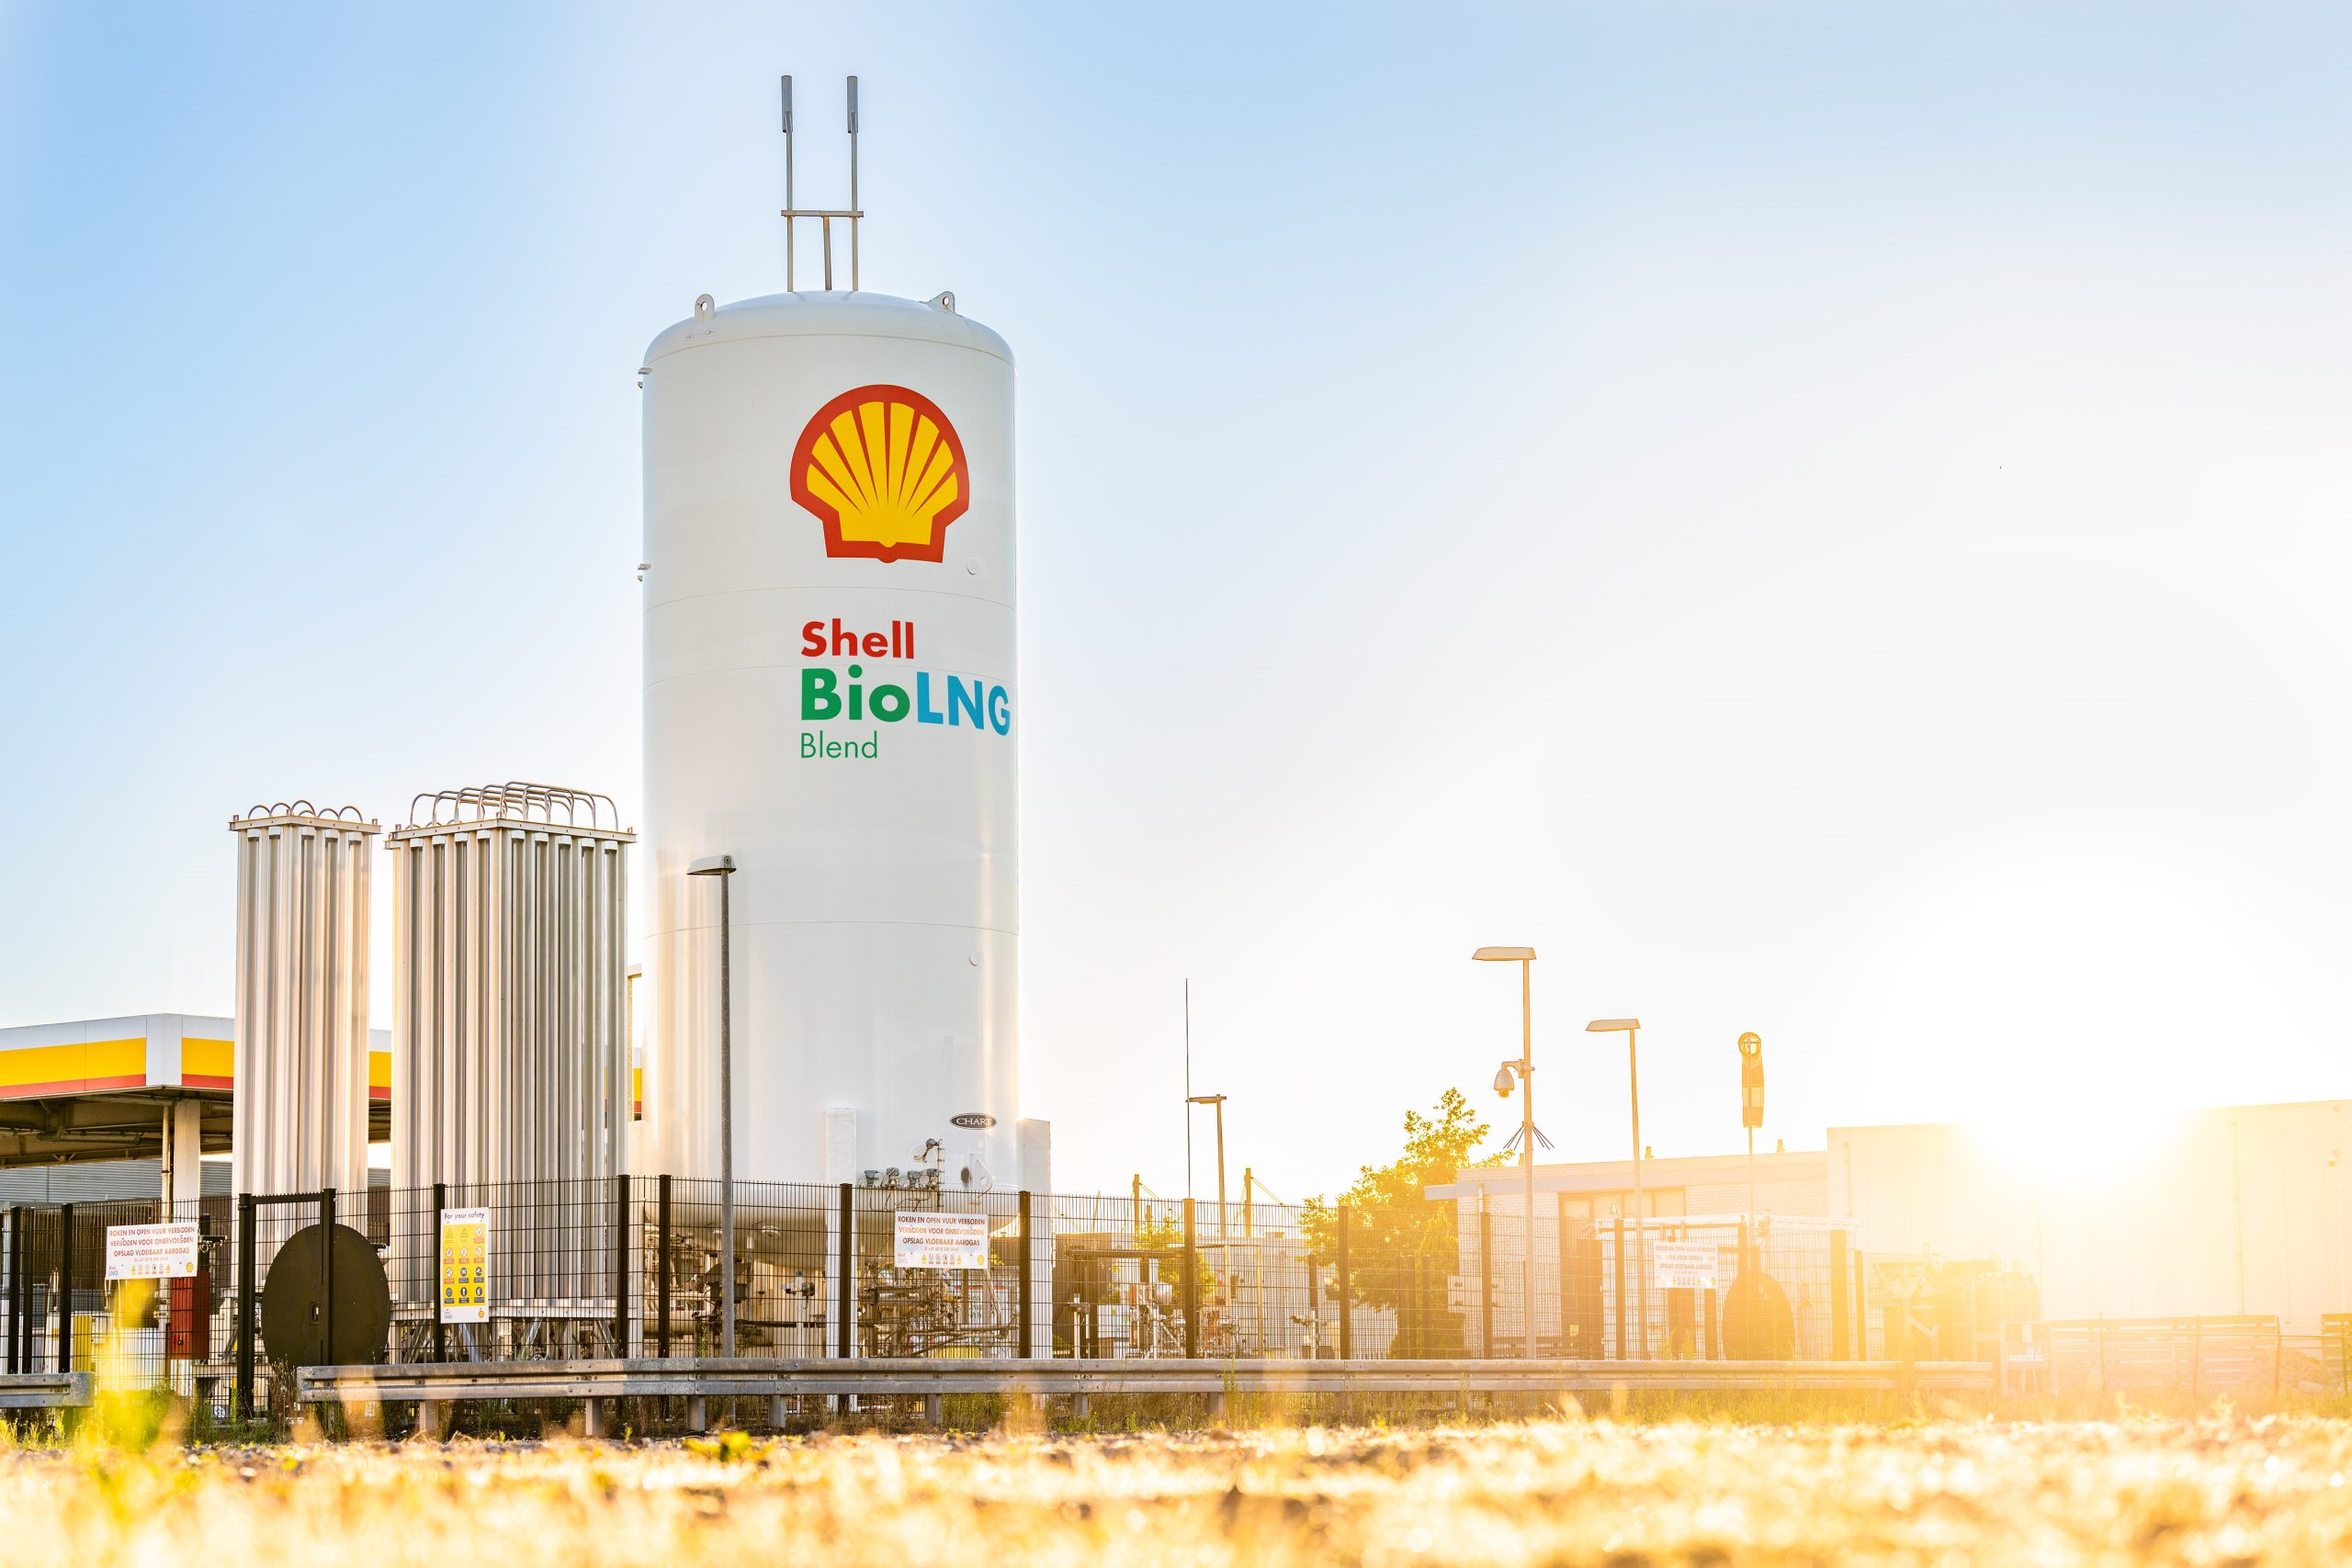 Evonik and Shell in bio-LNG move